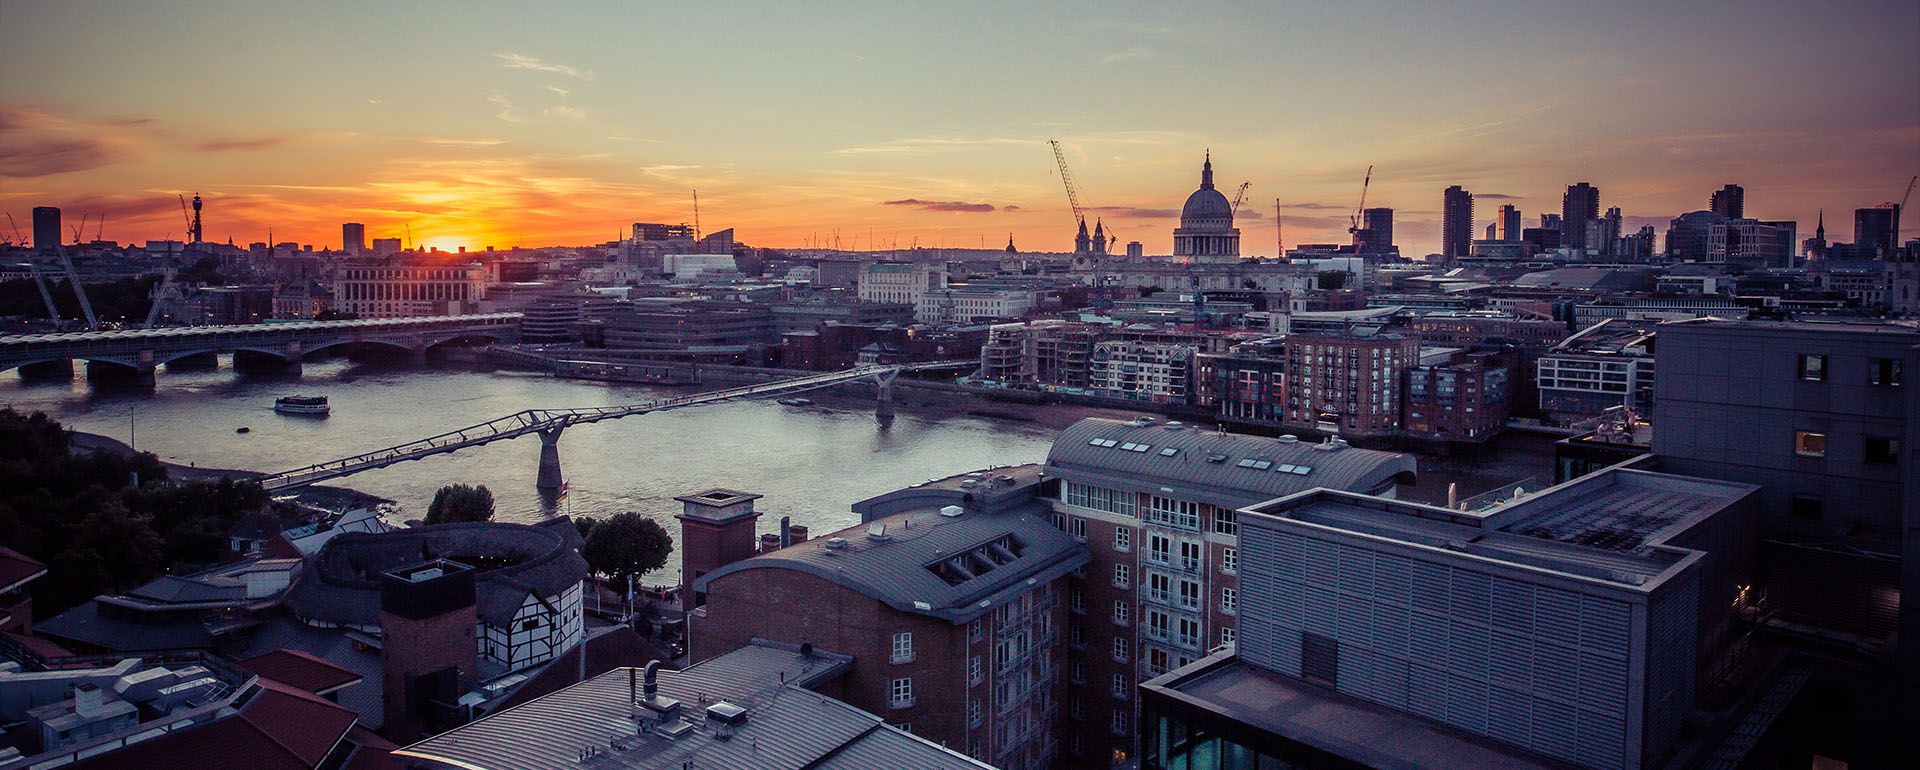 London Skyline at sunset with St Pauls